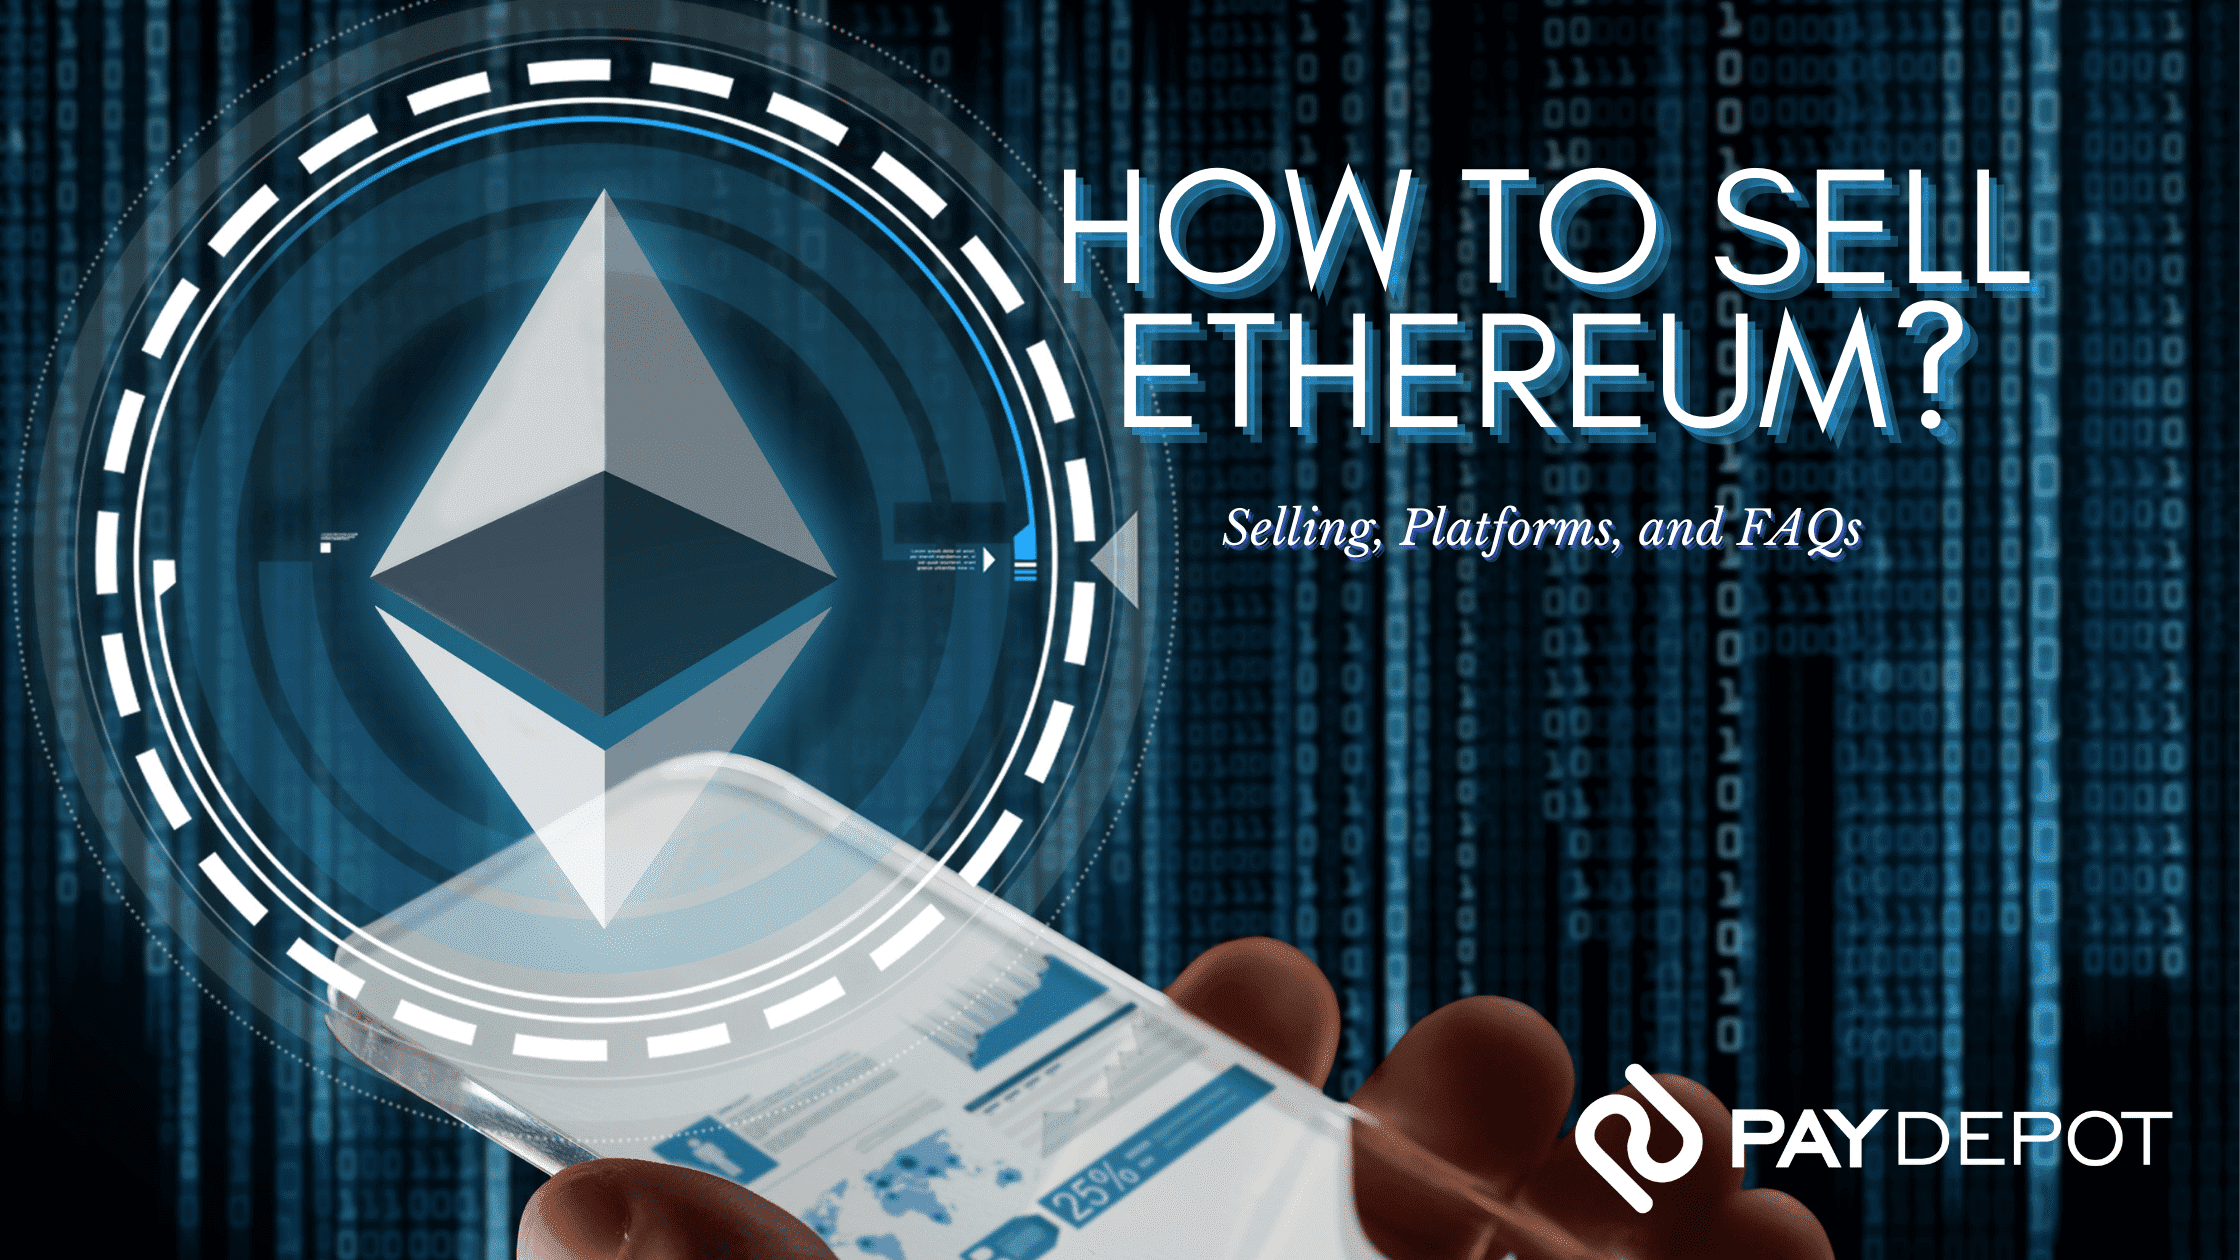 How to Sell Ethereum: Selling, Platforms, and FAQs